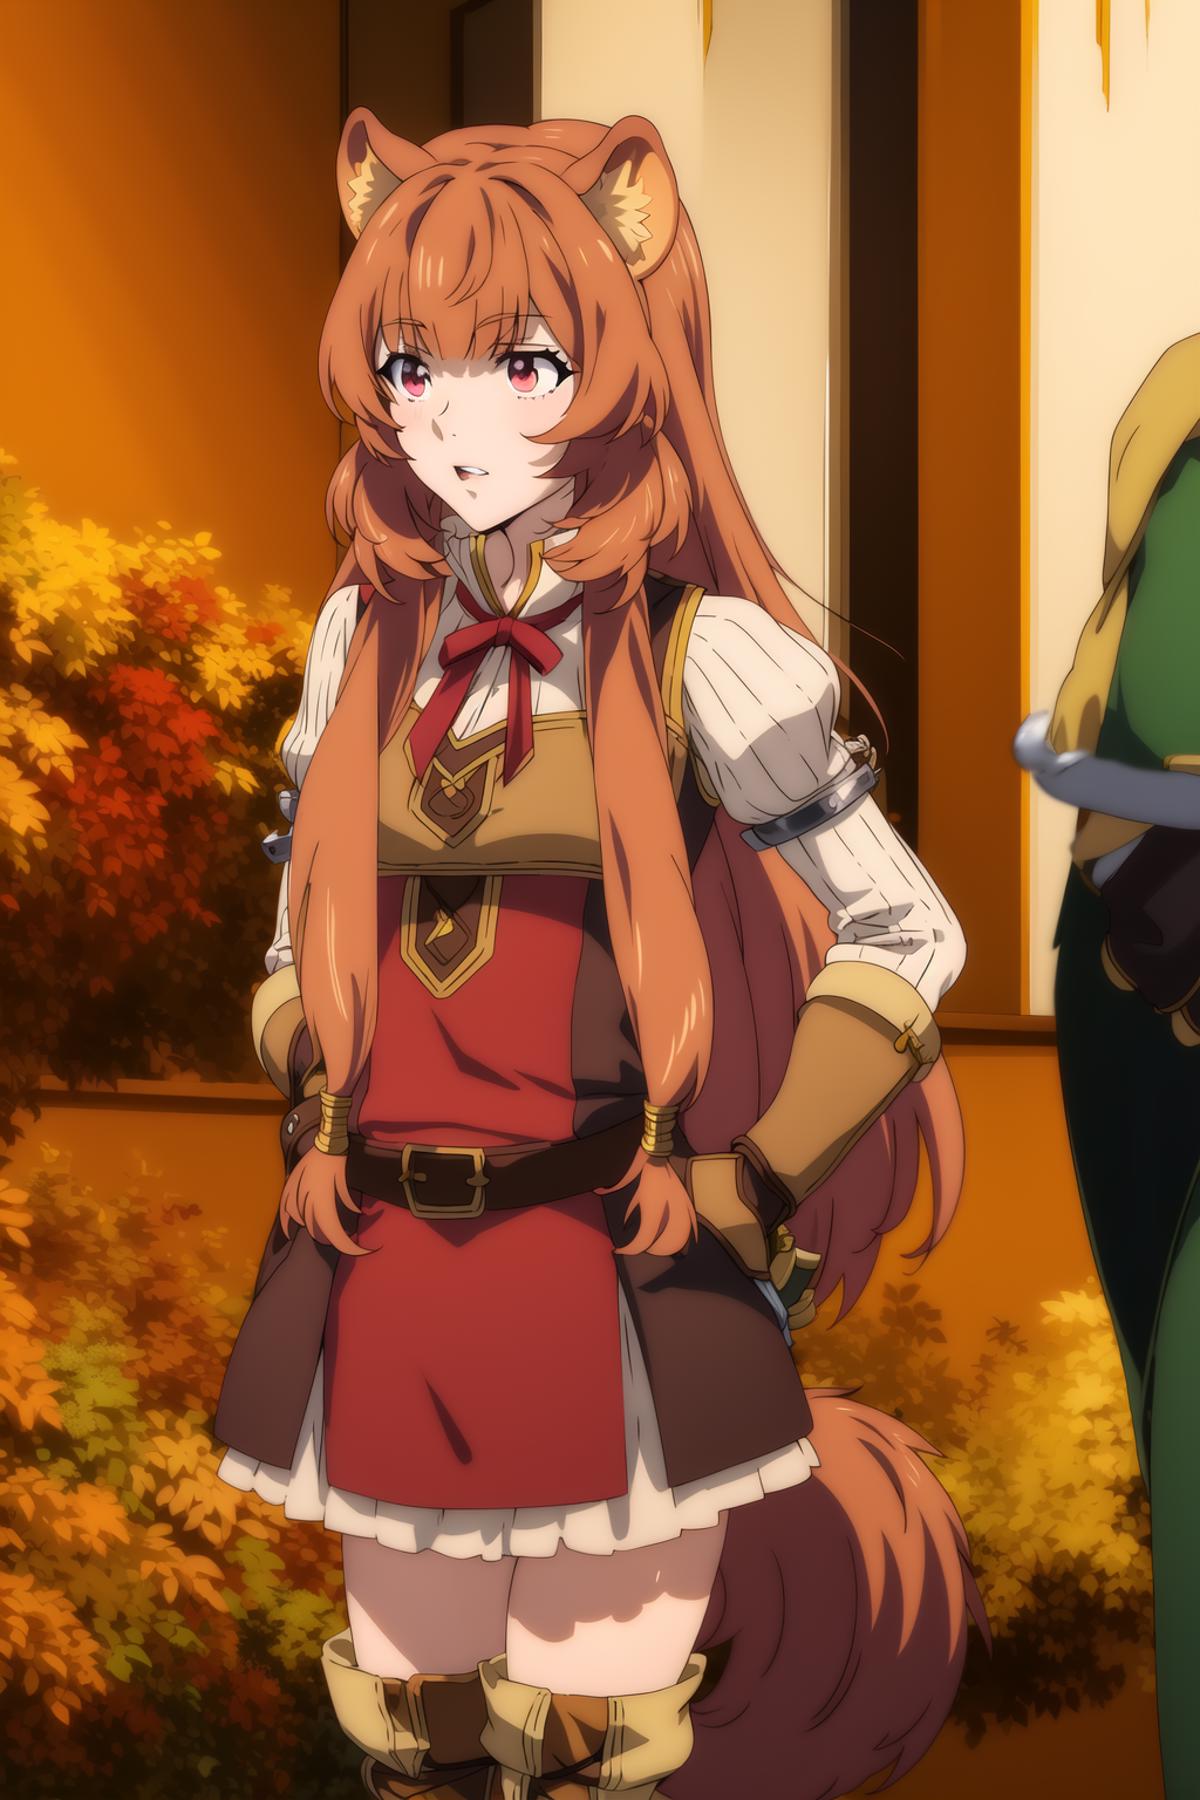 Raphtalia | The Rising Of The Shield Hero image by flawless_